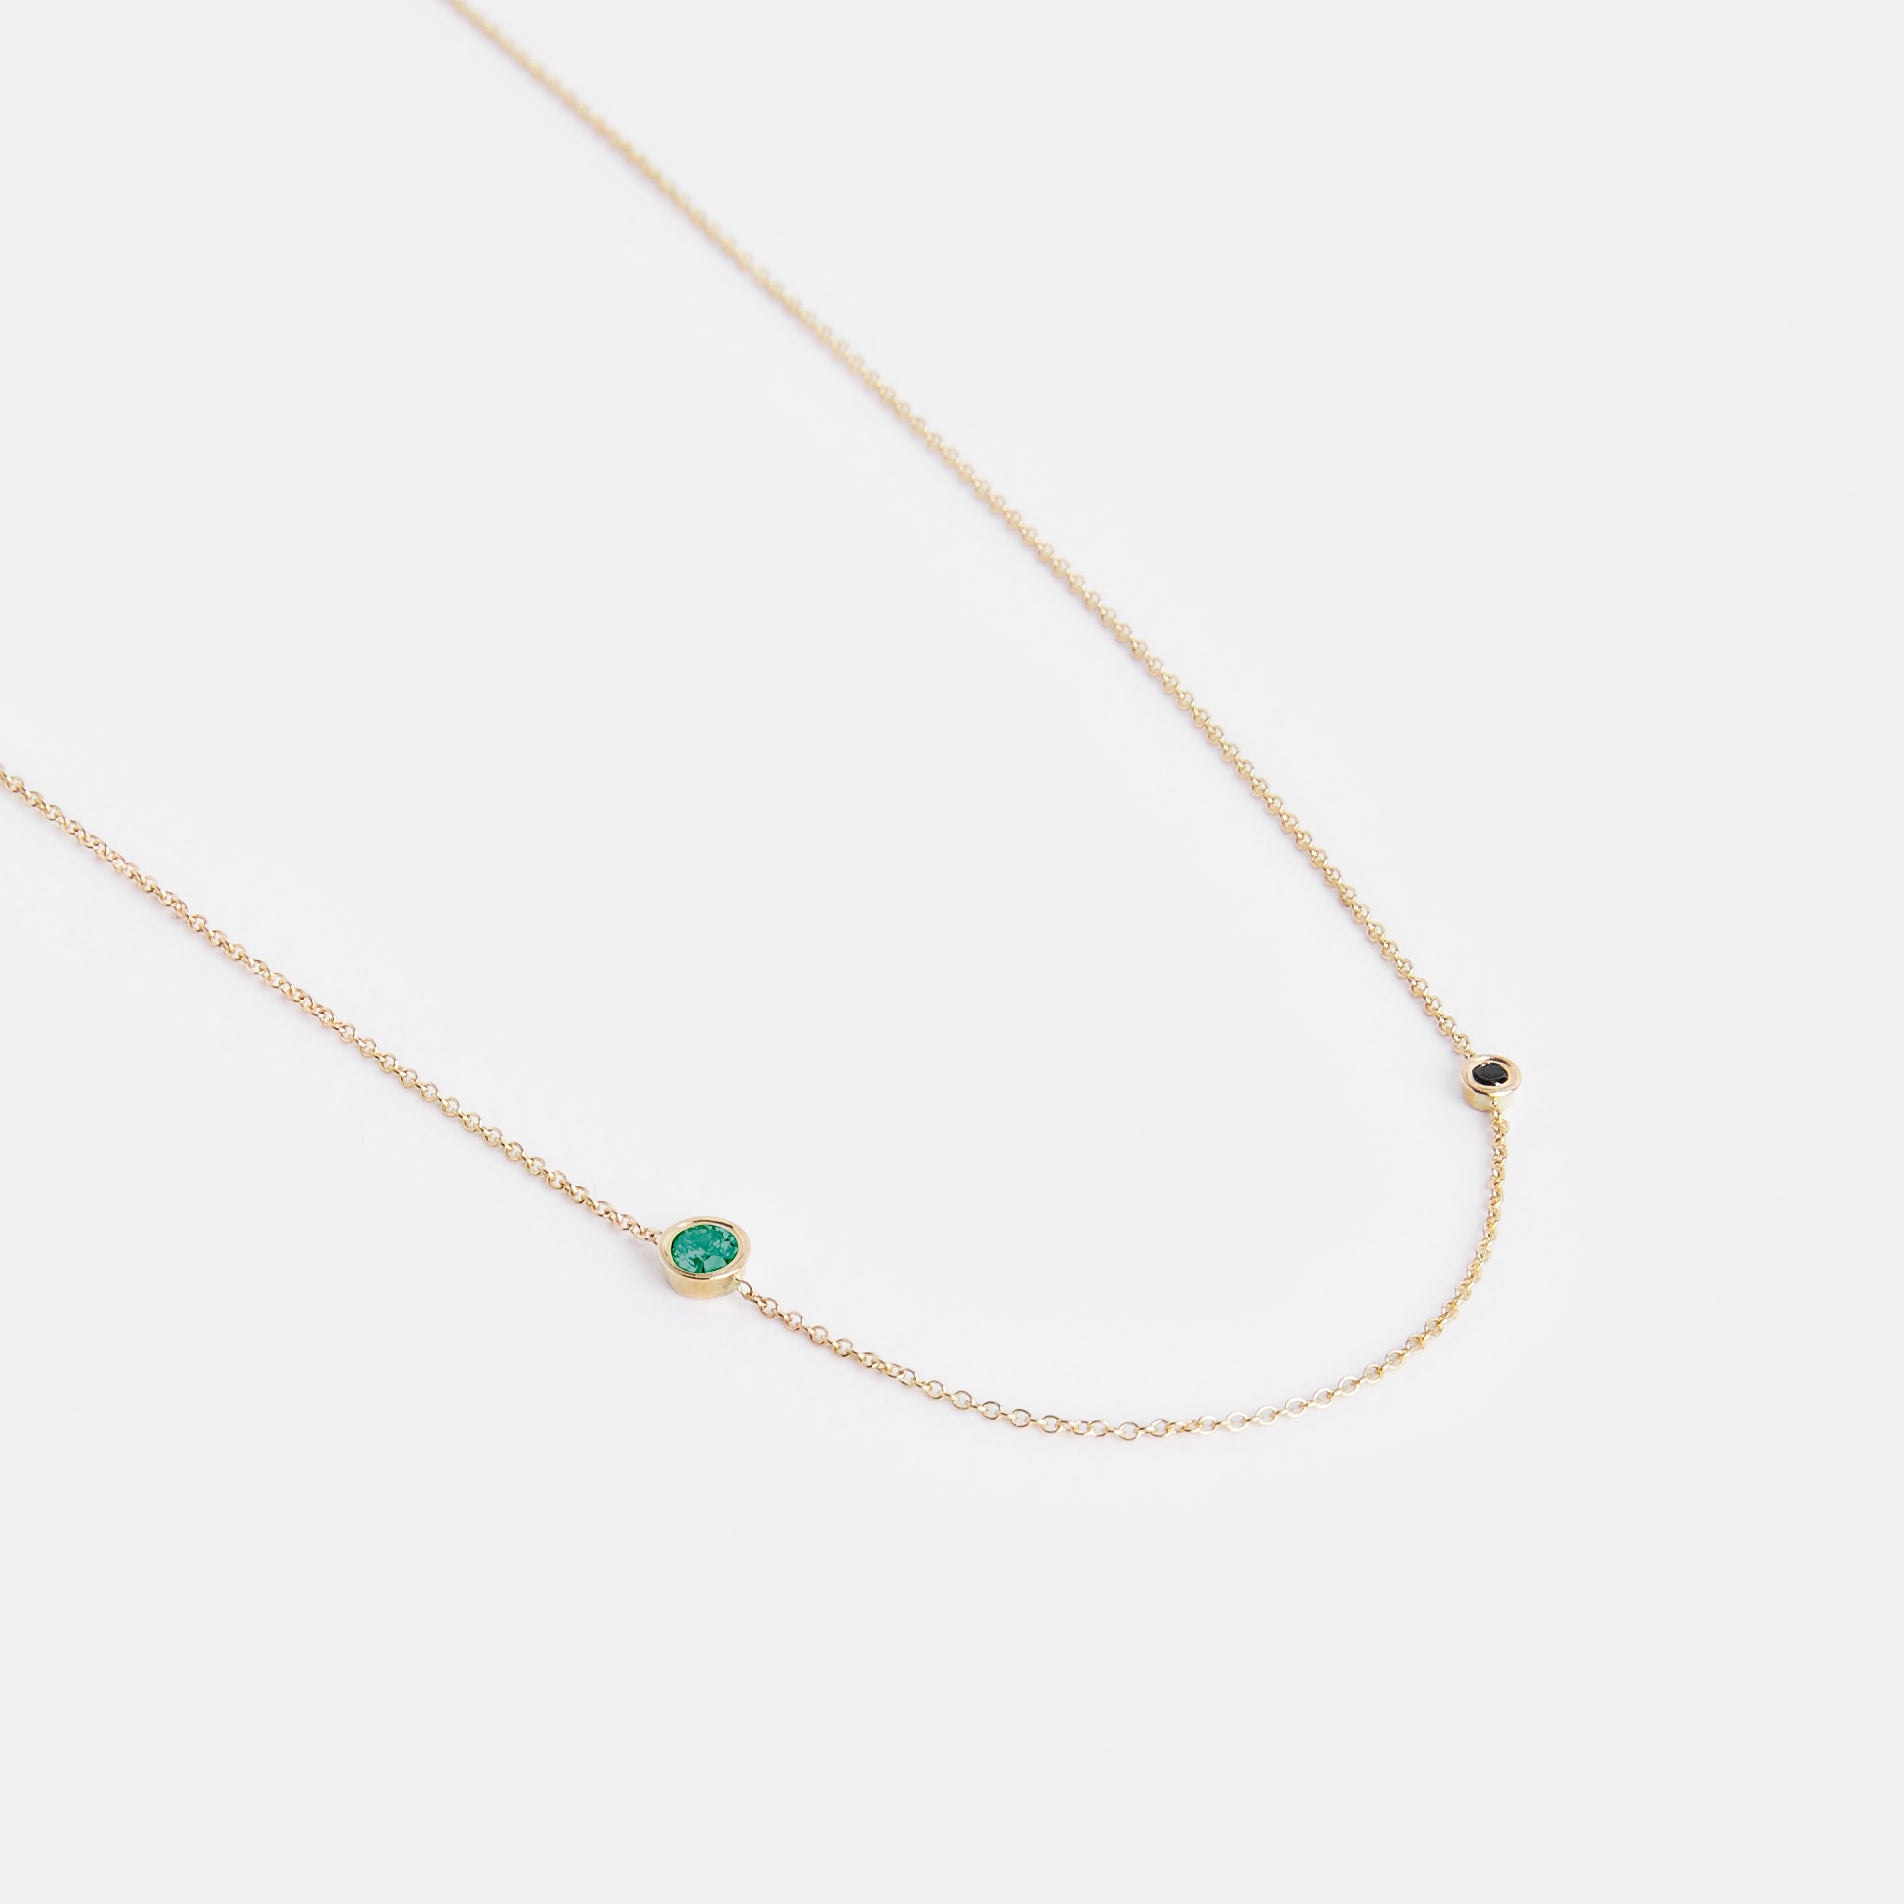 Iba Simple Necklace in 14k Gold set with Black Diamonds and Emerald By SHW Fine Jewelry NYC